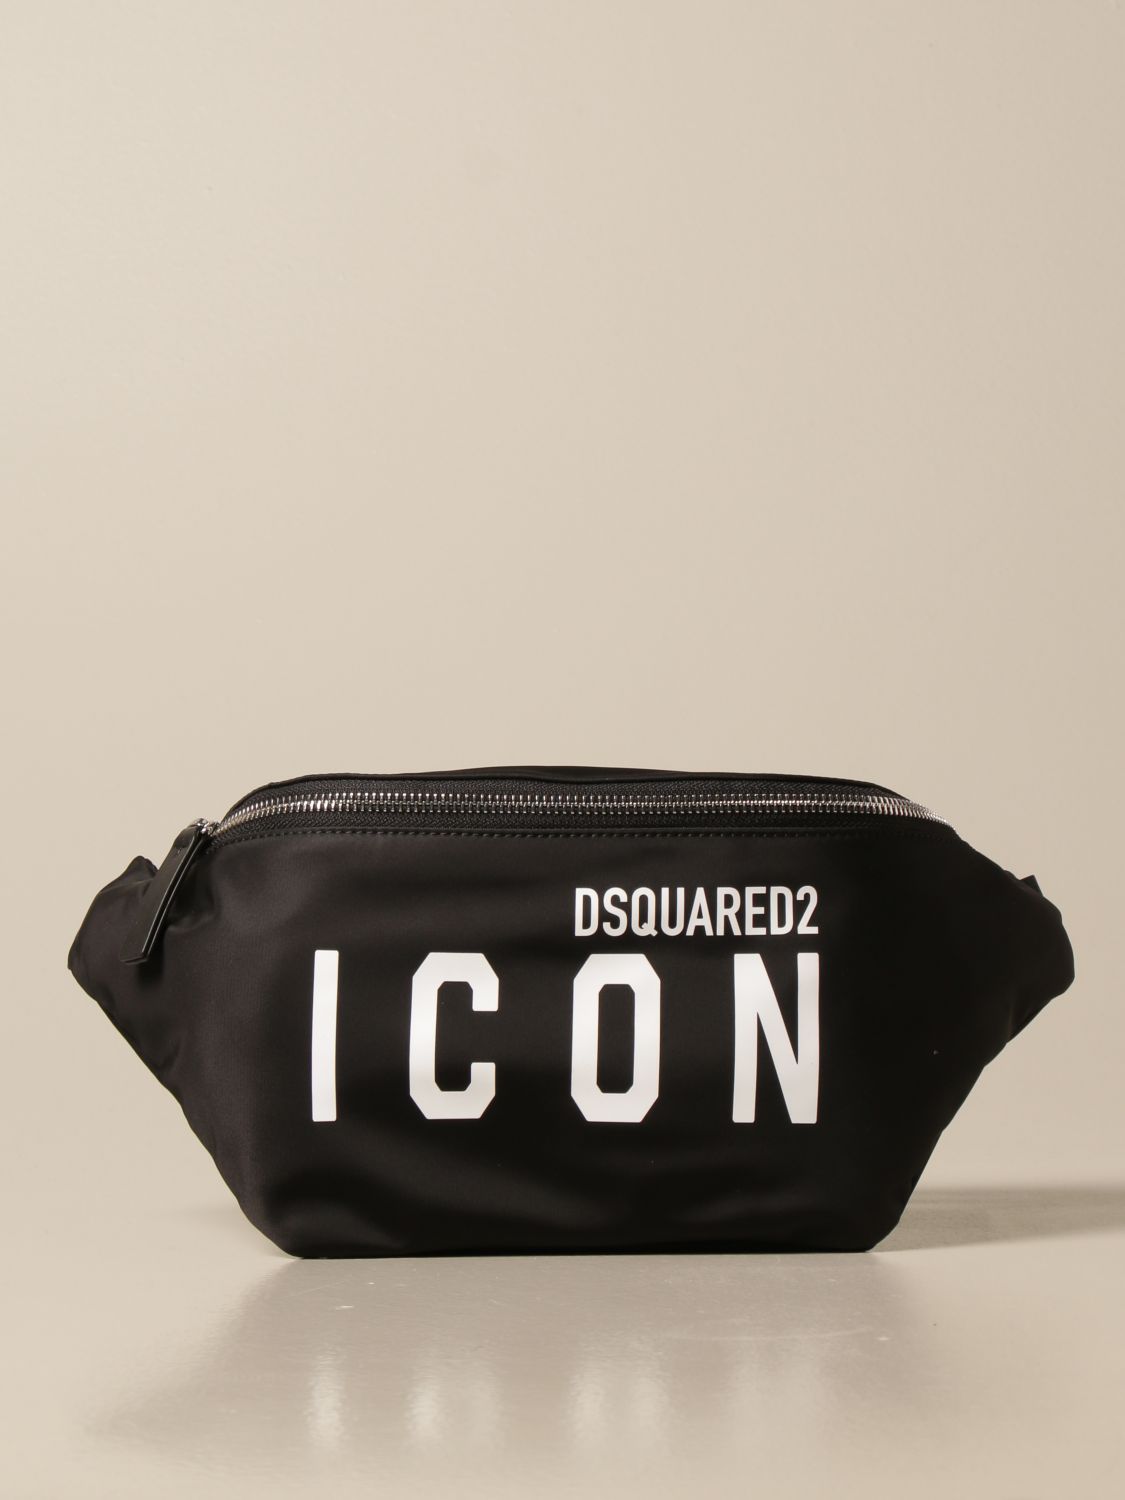 Icon Dsquared2 belt bag in technical canvas with logo